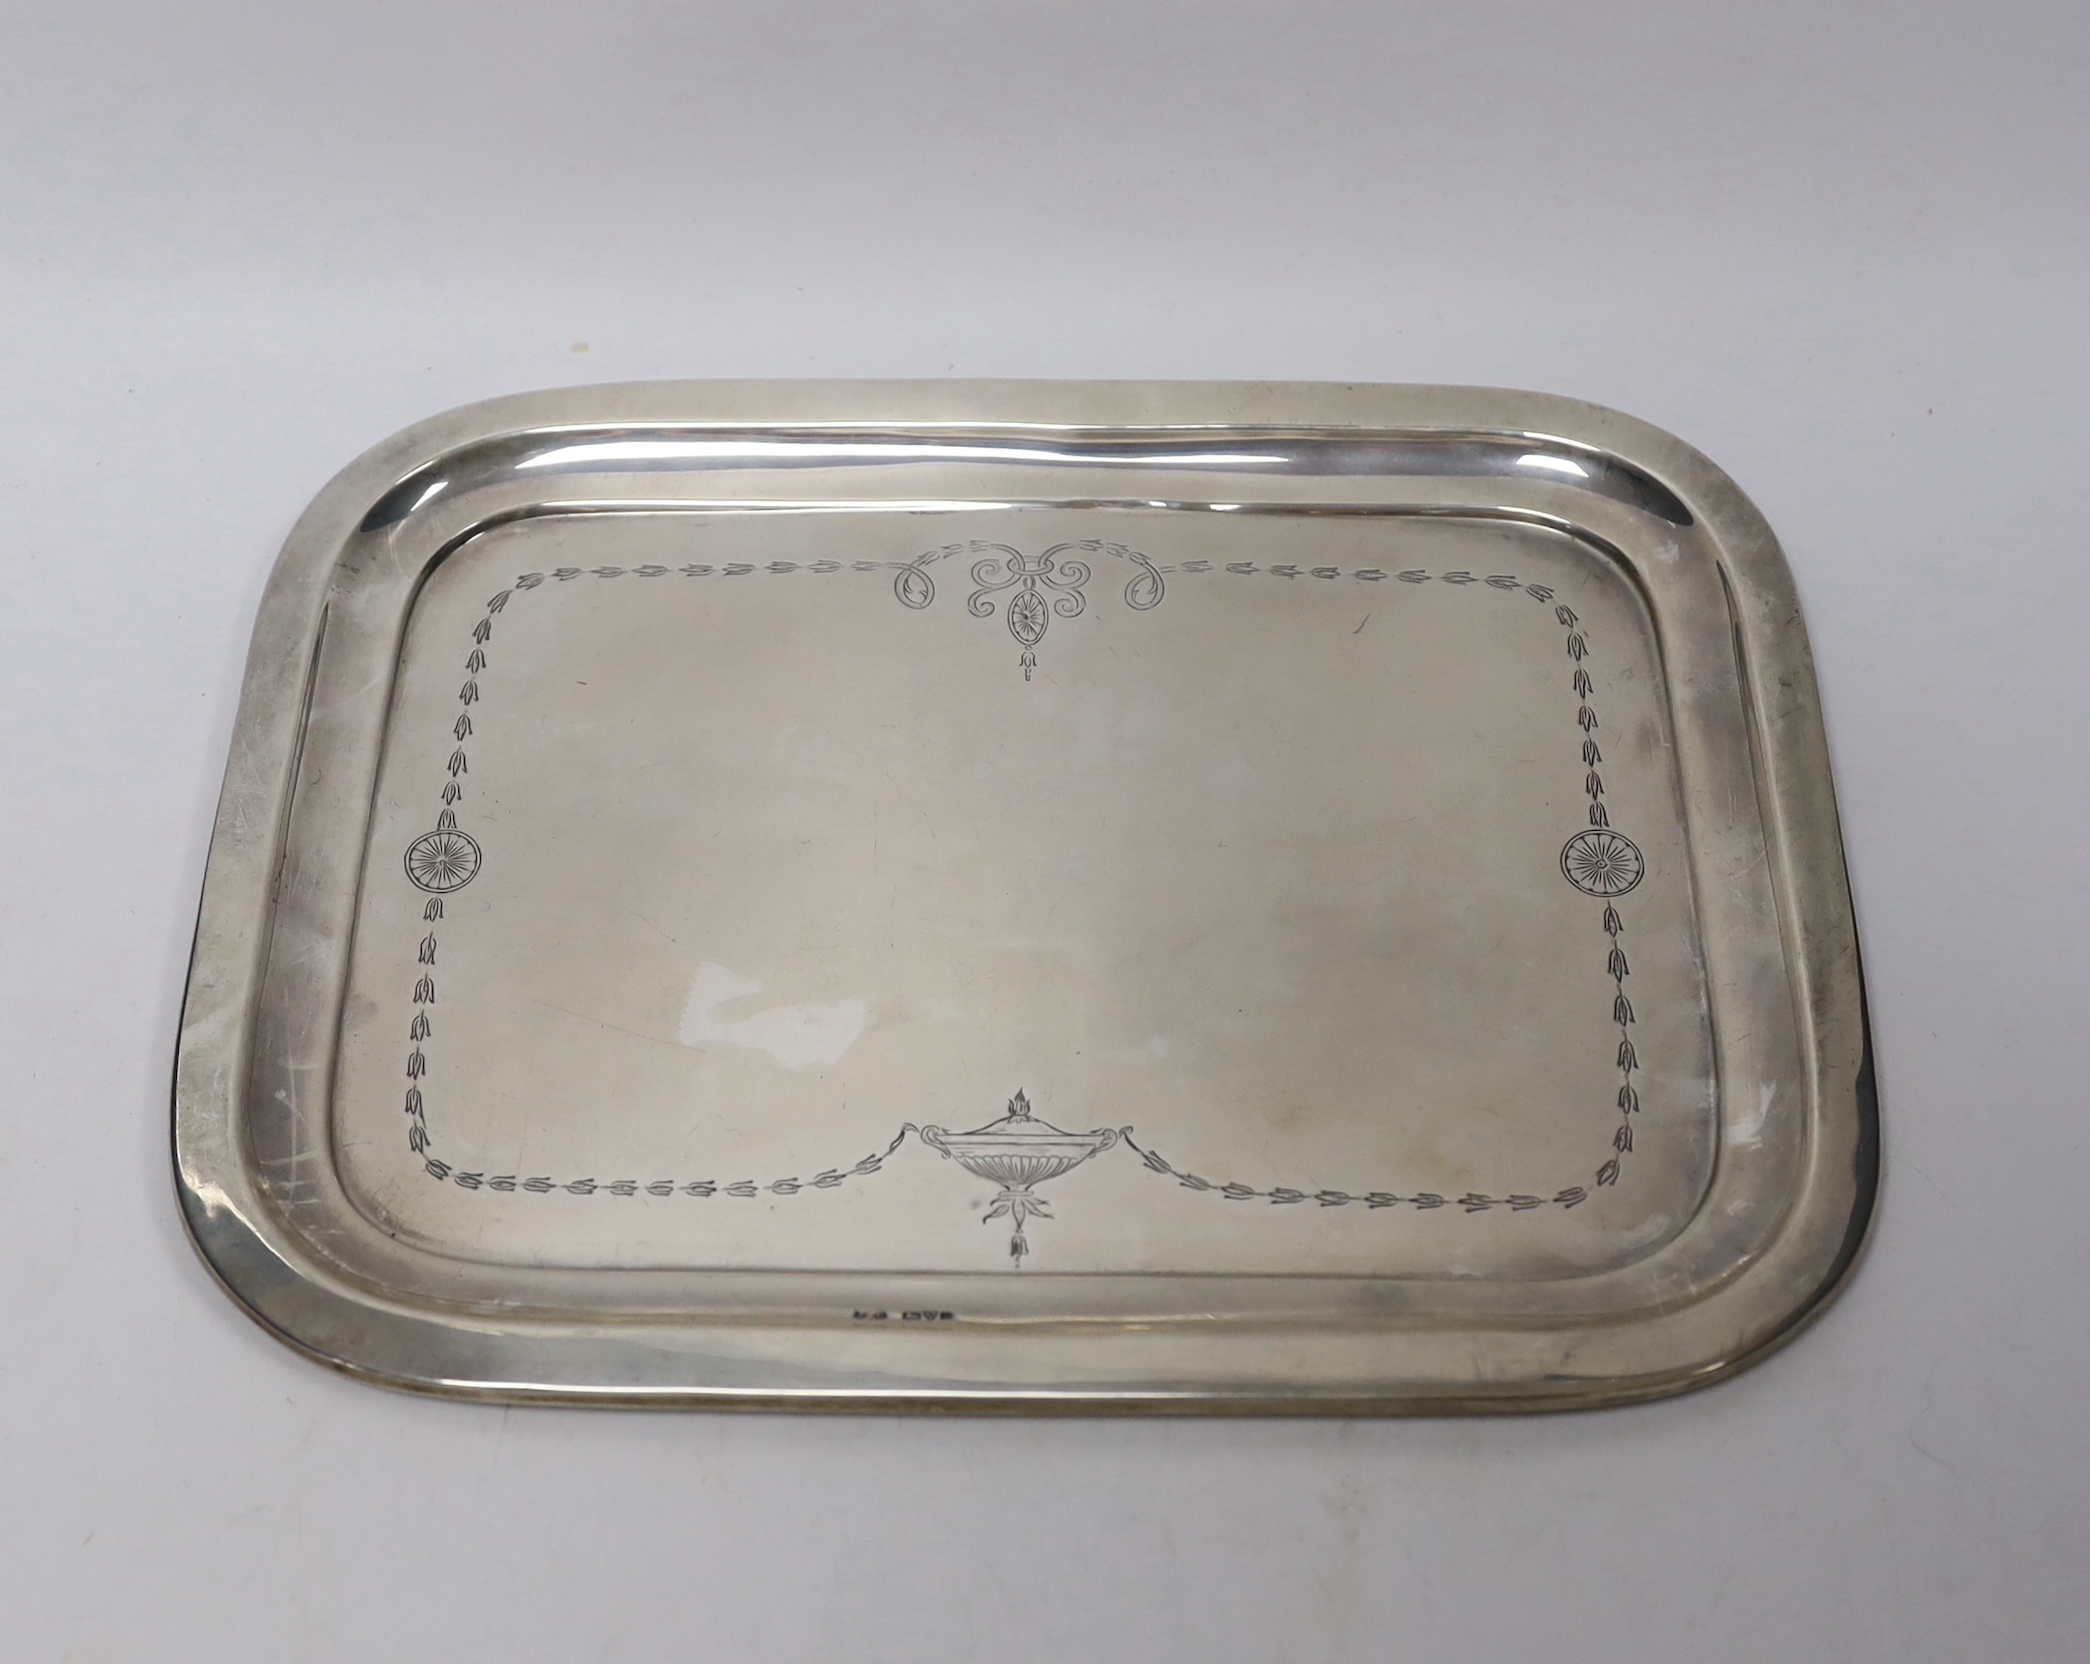 An early 20th century silver dressing table tray, Jones & Crompton, Chester, circa 1910, 30.8cm